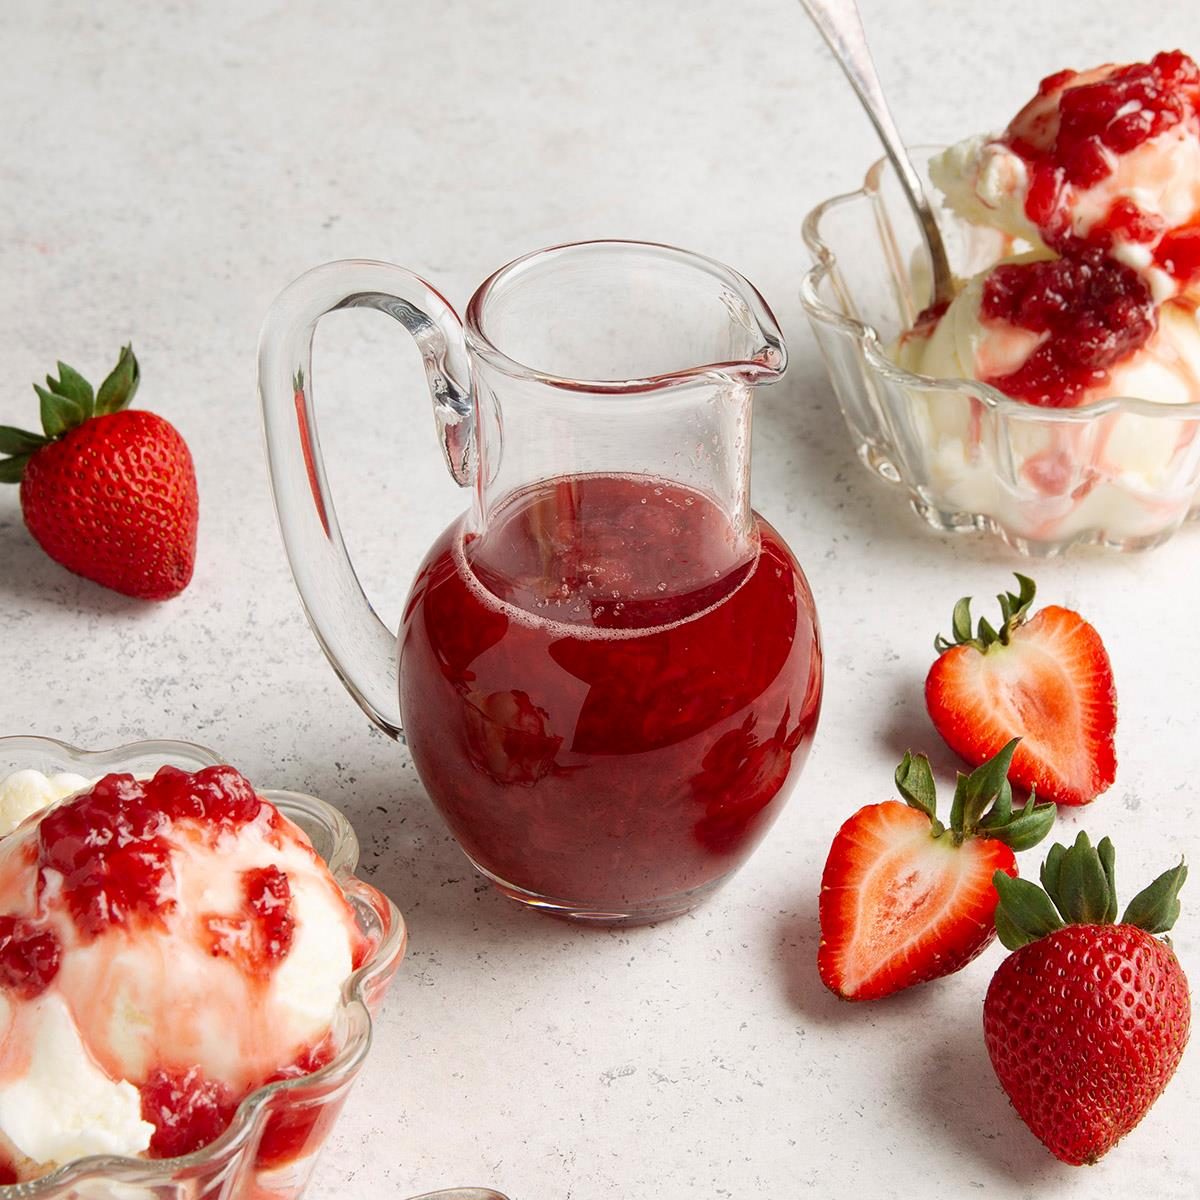 Homemade Strawberry Syrup Recipe: How to Make It